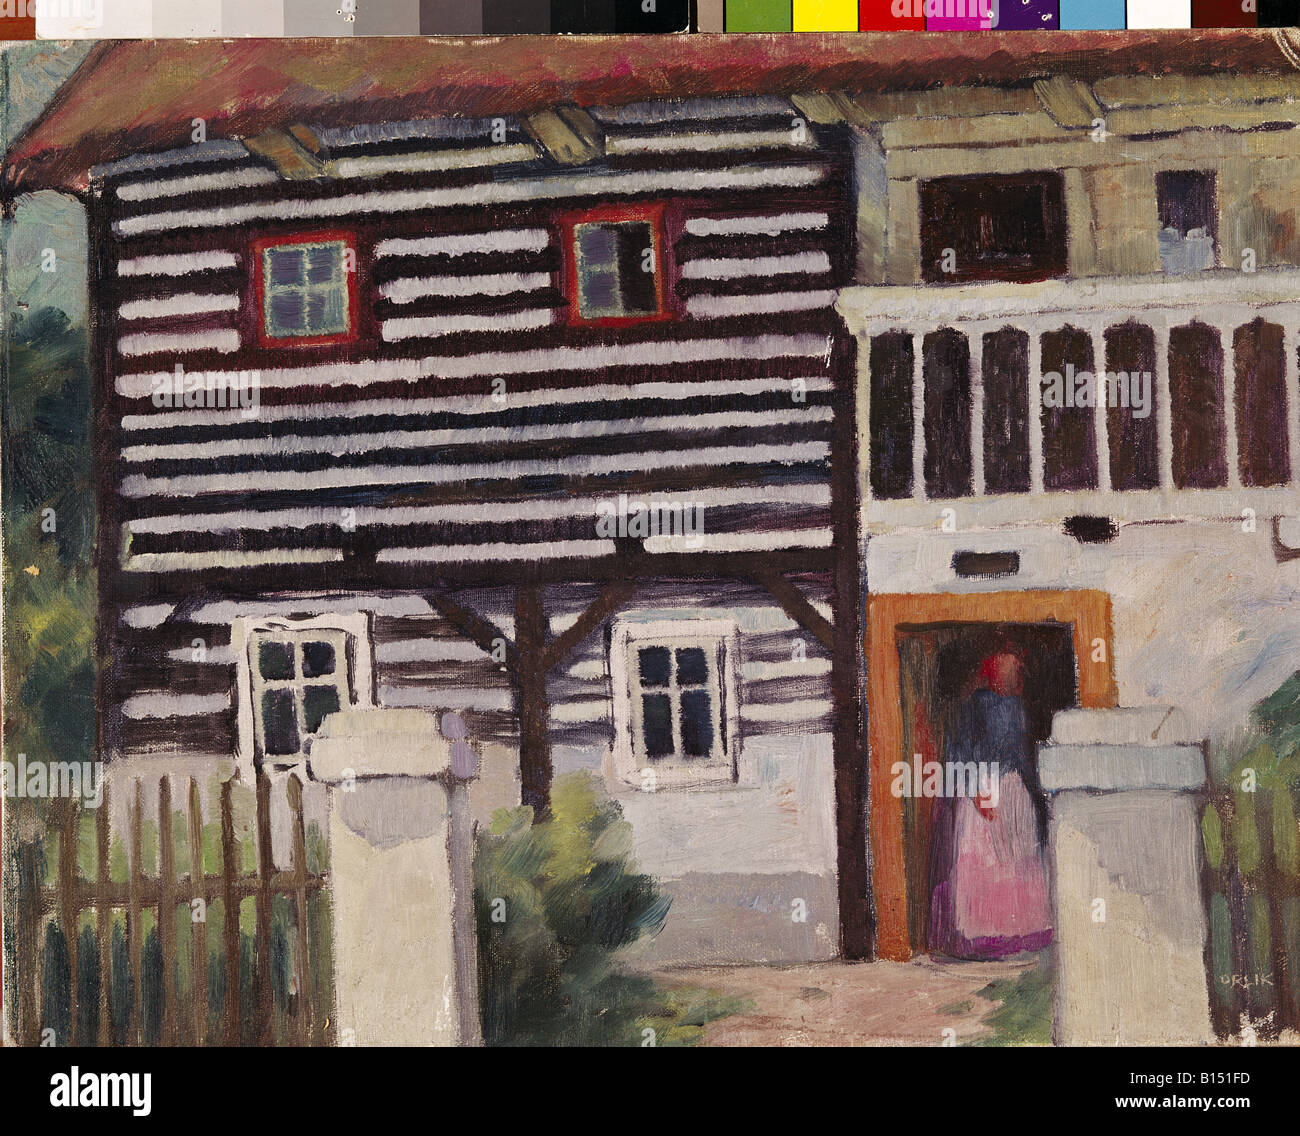 fine arts, Orlik, Emil, (1870 - 1932), painting, 'Bauernhaus', 'farmhouse', East German gallery, Regensburg, Germany, Artist's Copyright has not to be cleared Stock Photo